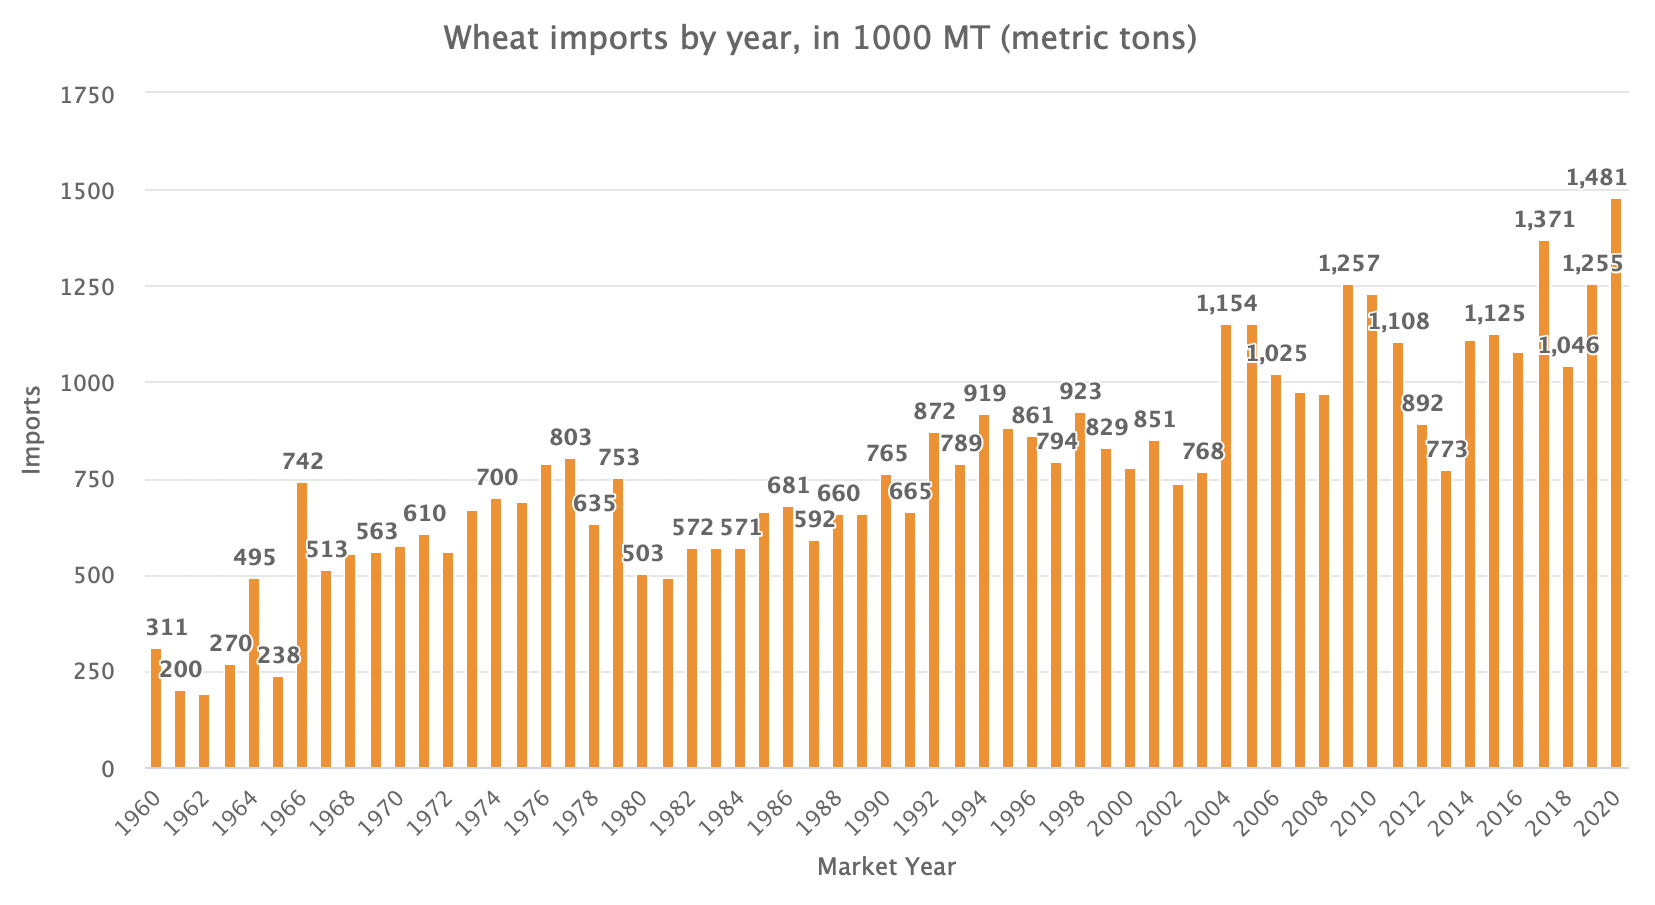 As for wheat: Sri Lanka does not produce wheat, and has always relied on importing wheat for local flour mills. As of late, we’ve begun importing wheat flour directly.